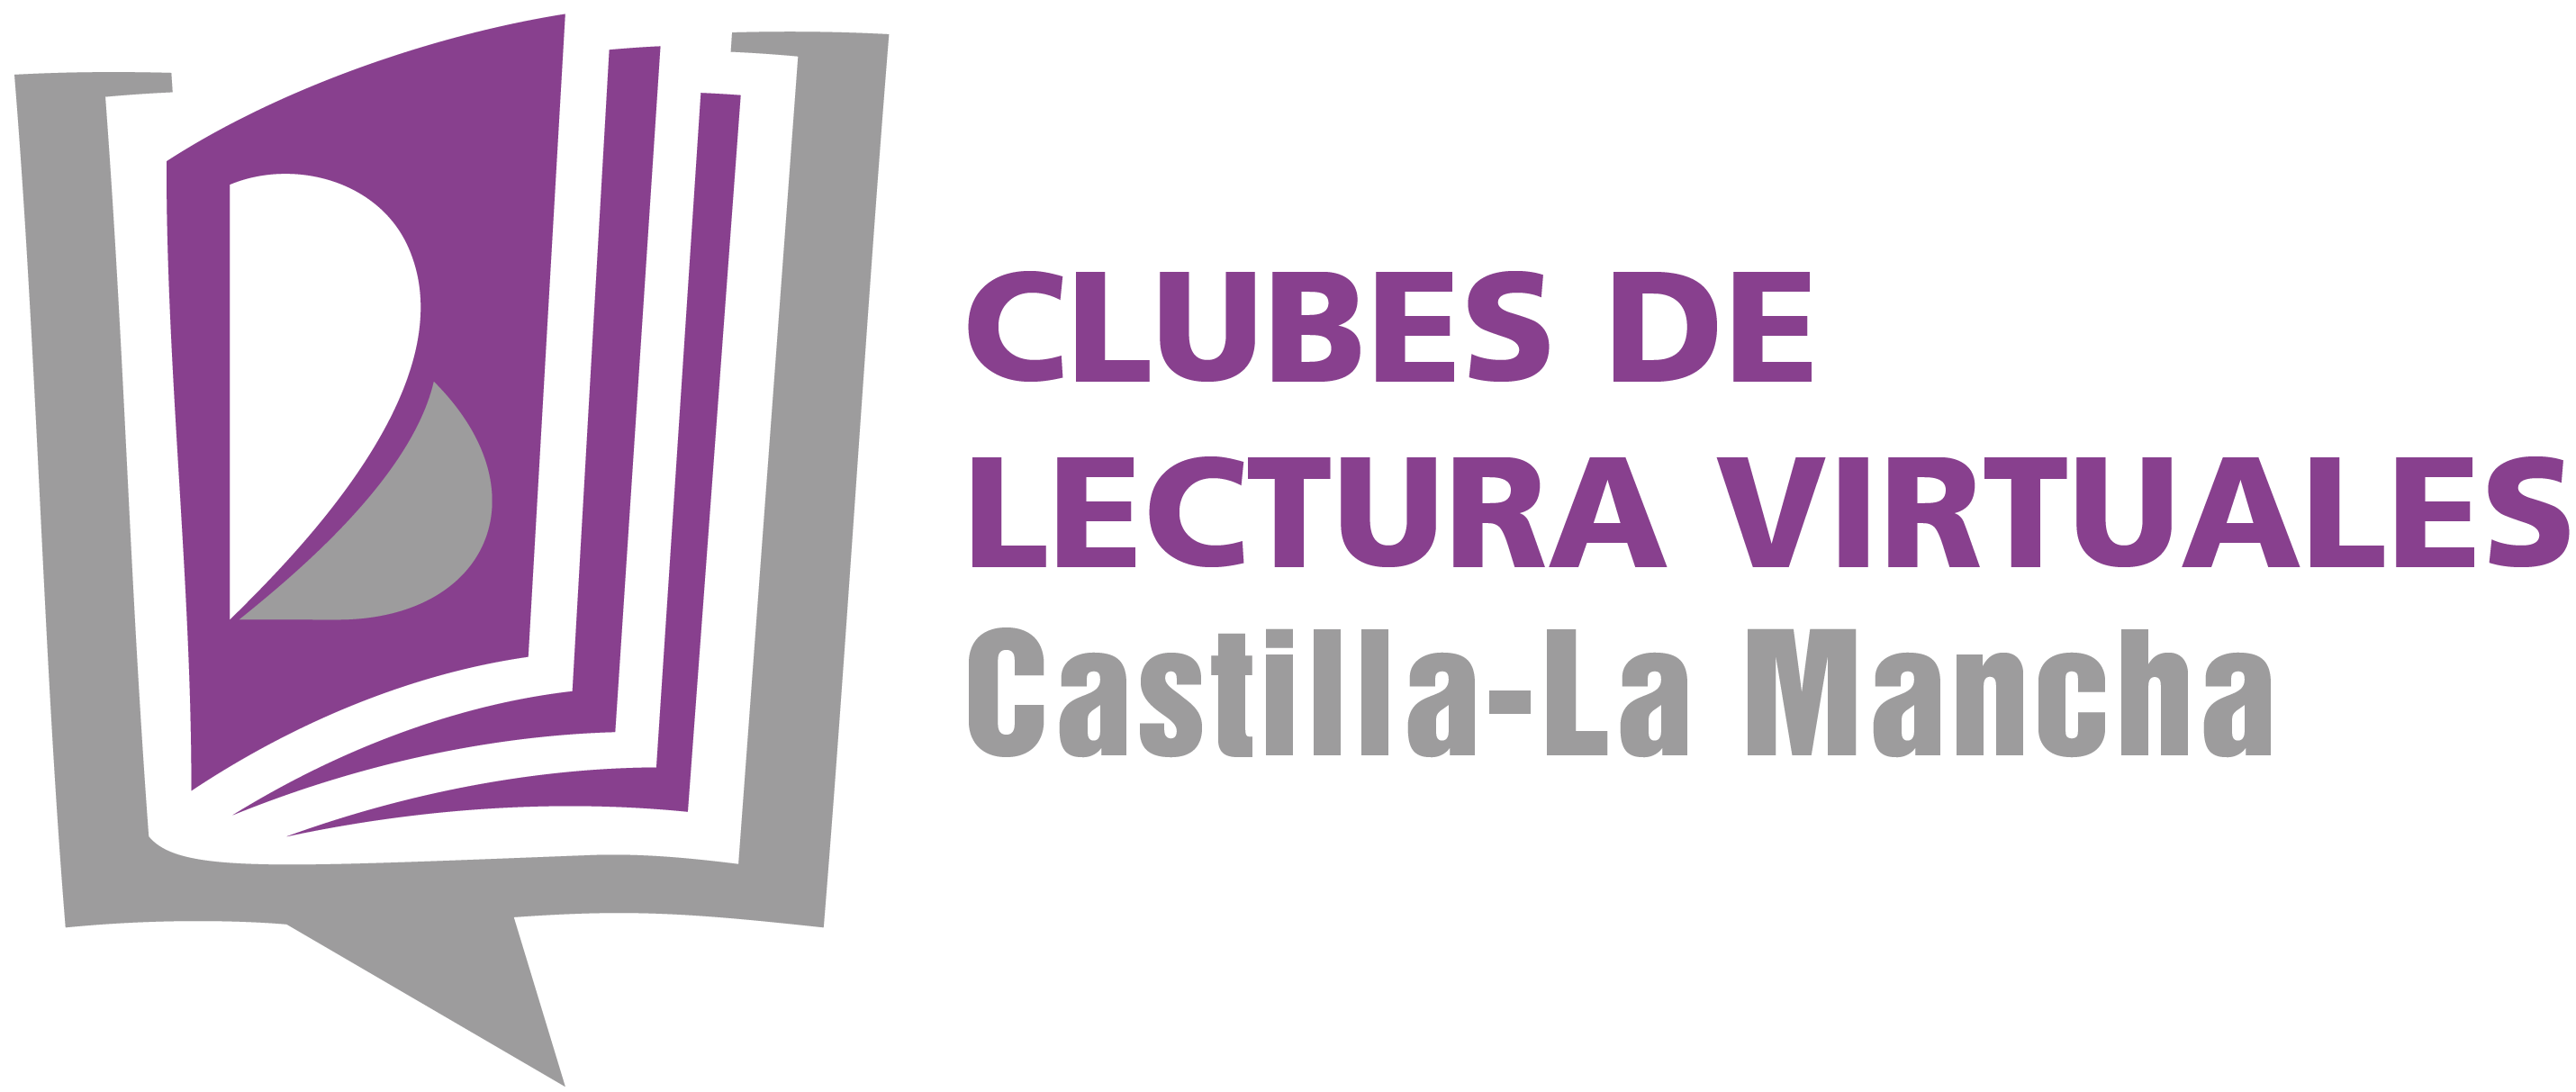 ClubesLecturaVirtuales1